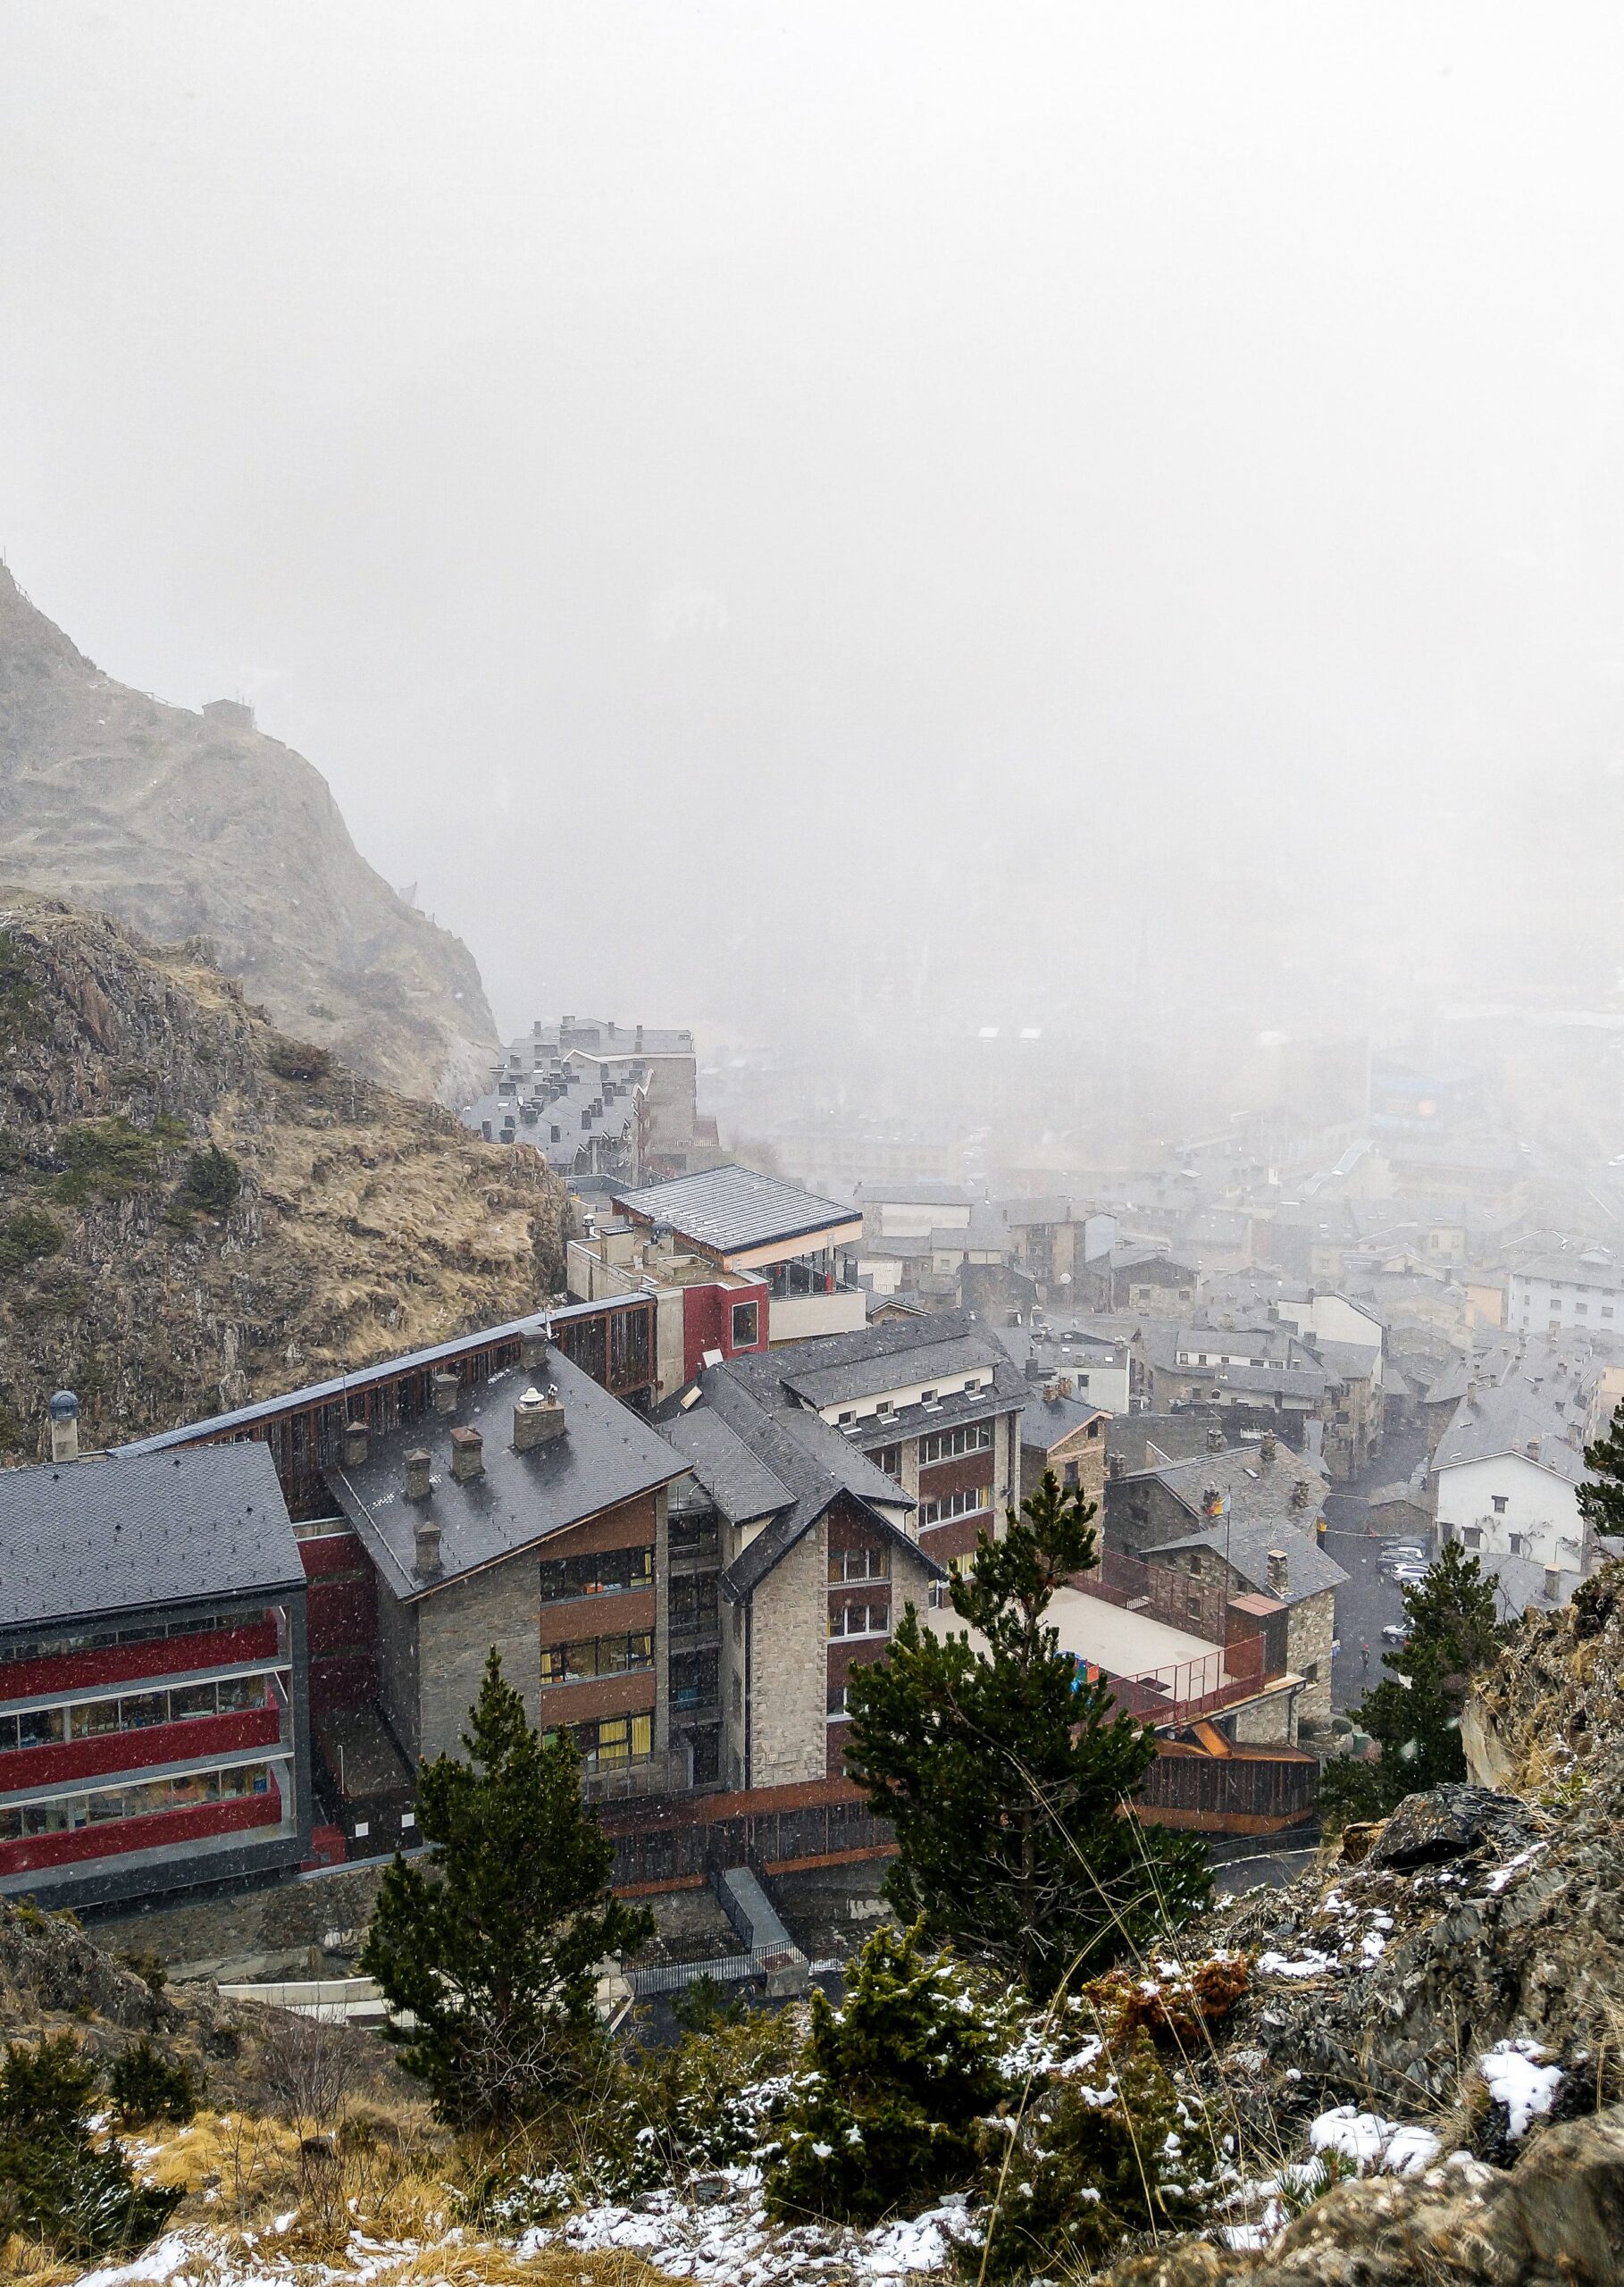 The football landscape in Andorra